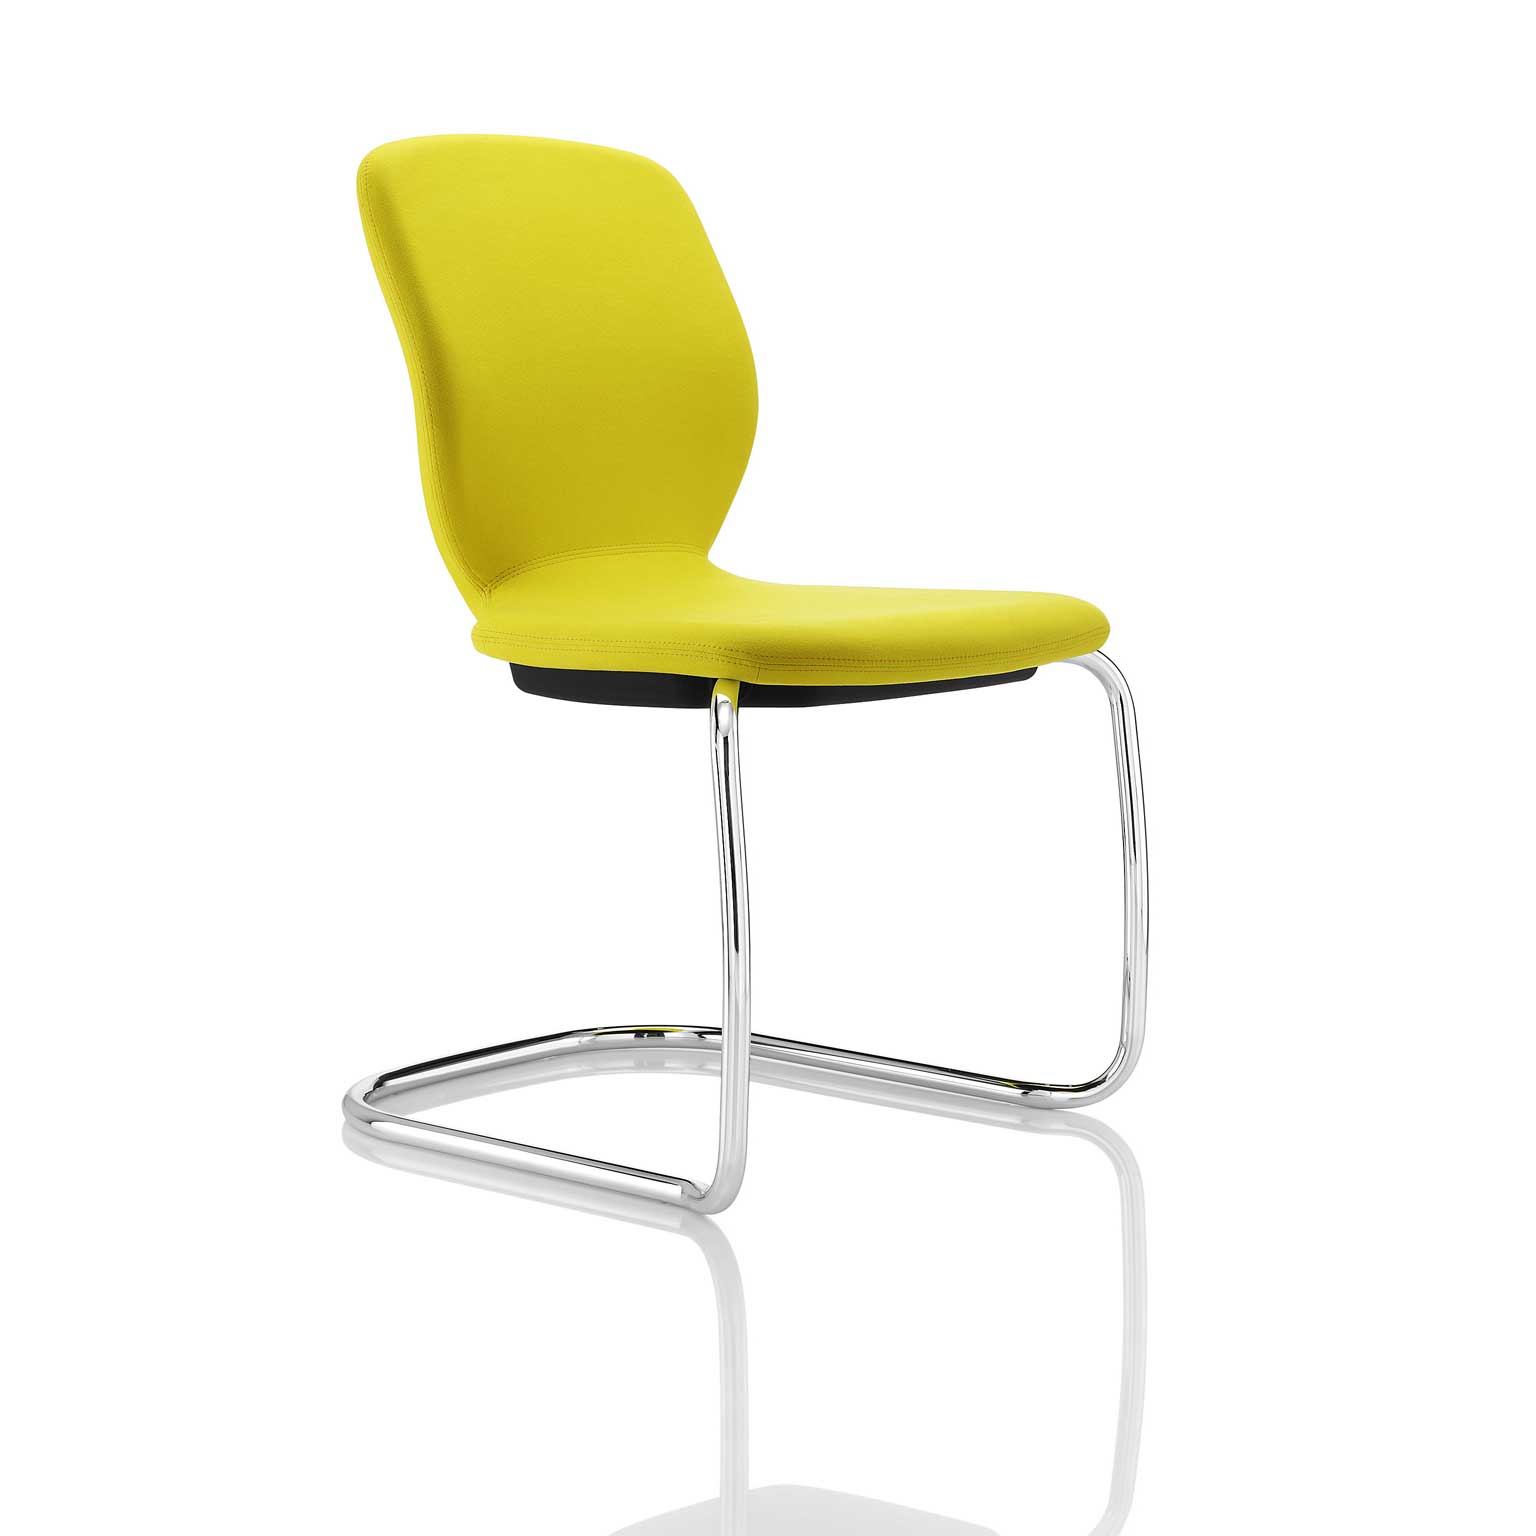 affordable office chairs easily boss stylish yellow cantilever visitors seat